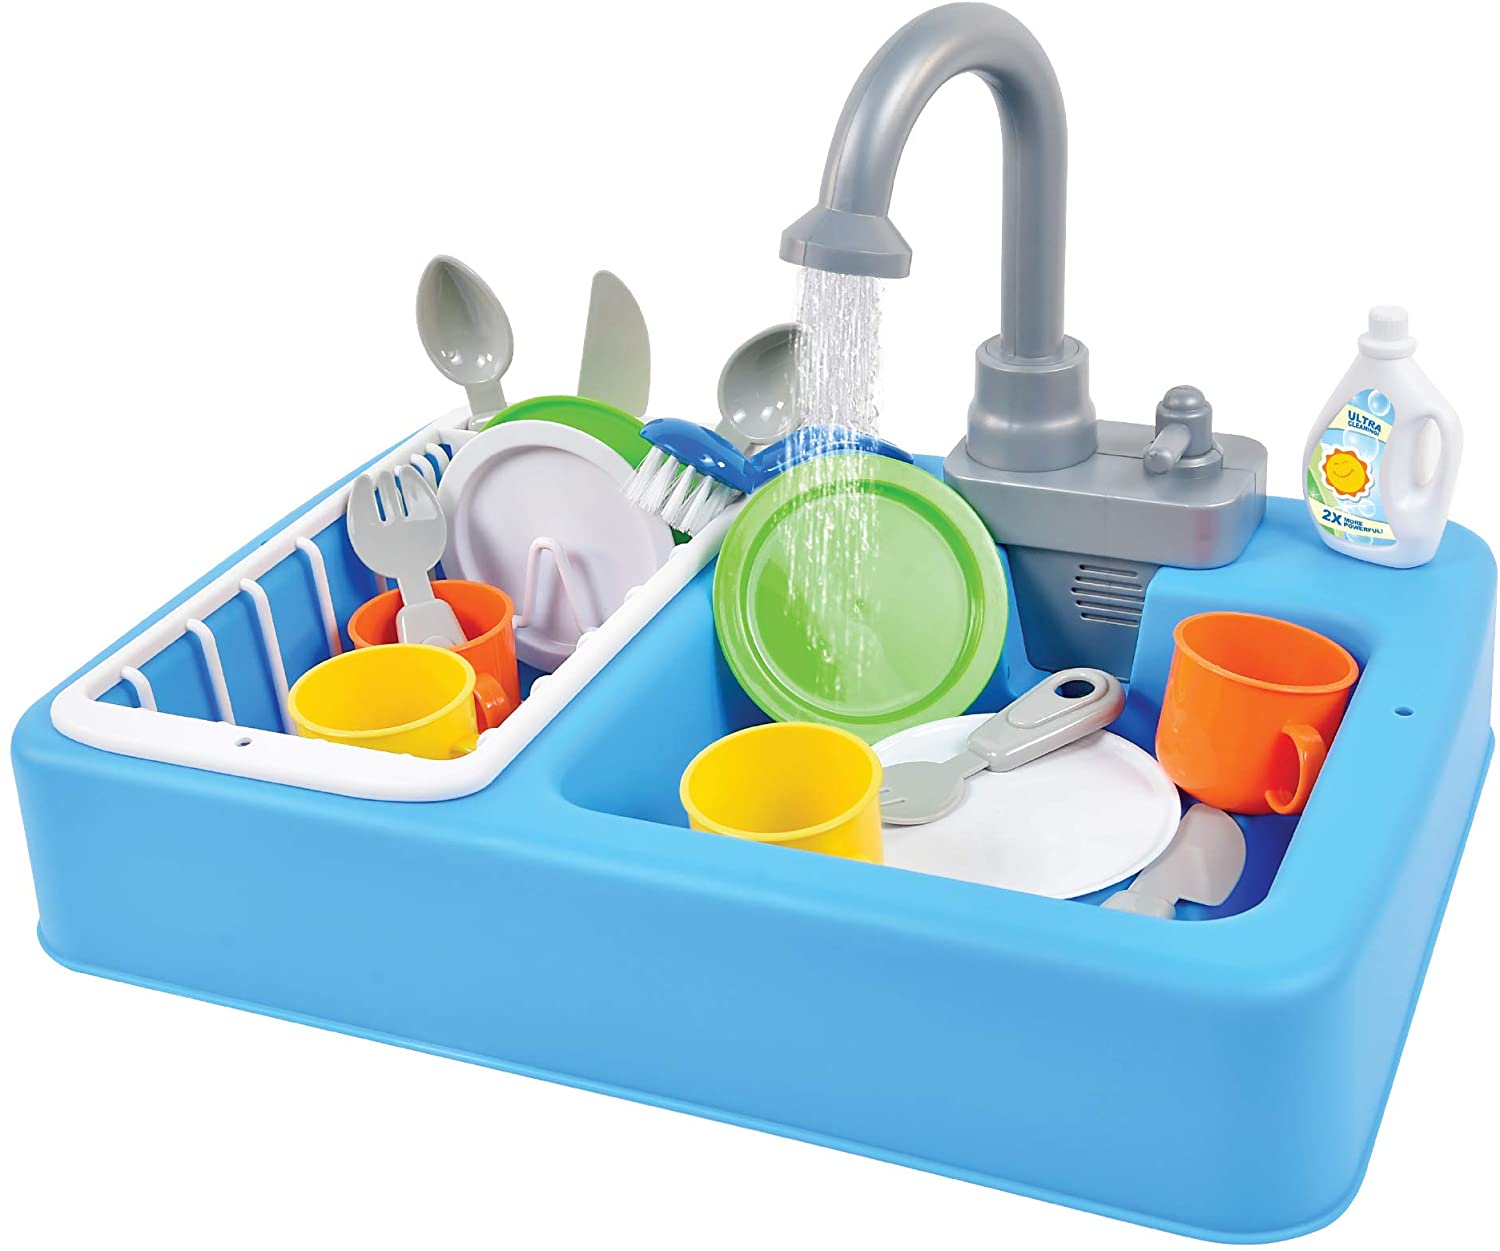 Sunny Days Entertainment Dish Sink Play Kitchen For Kids